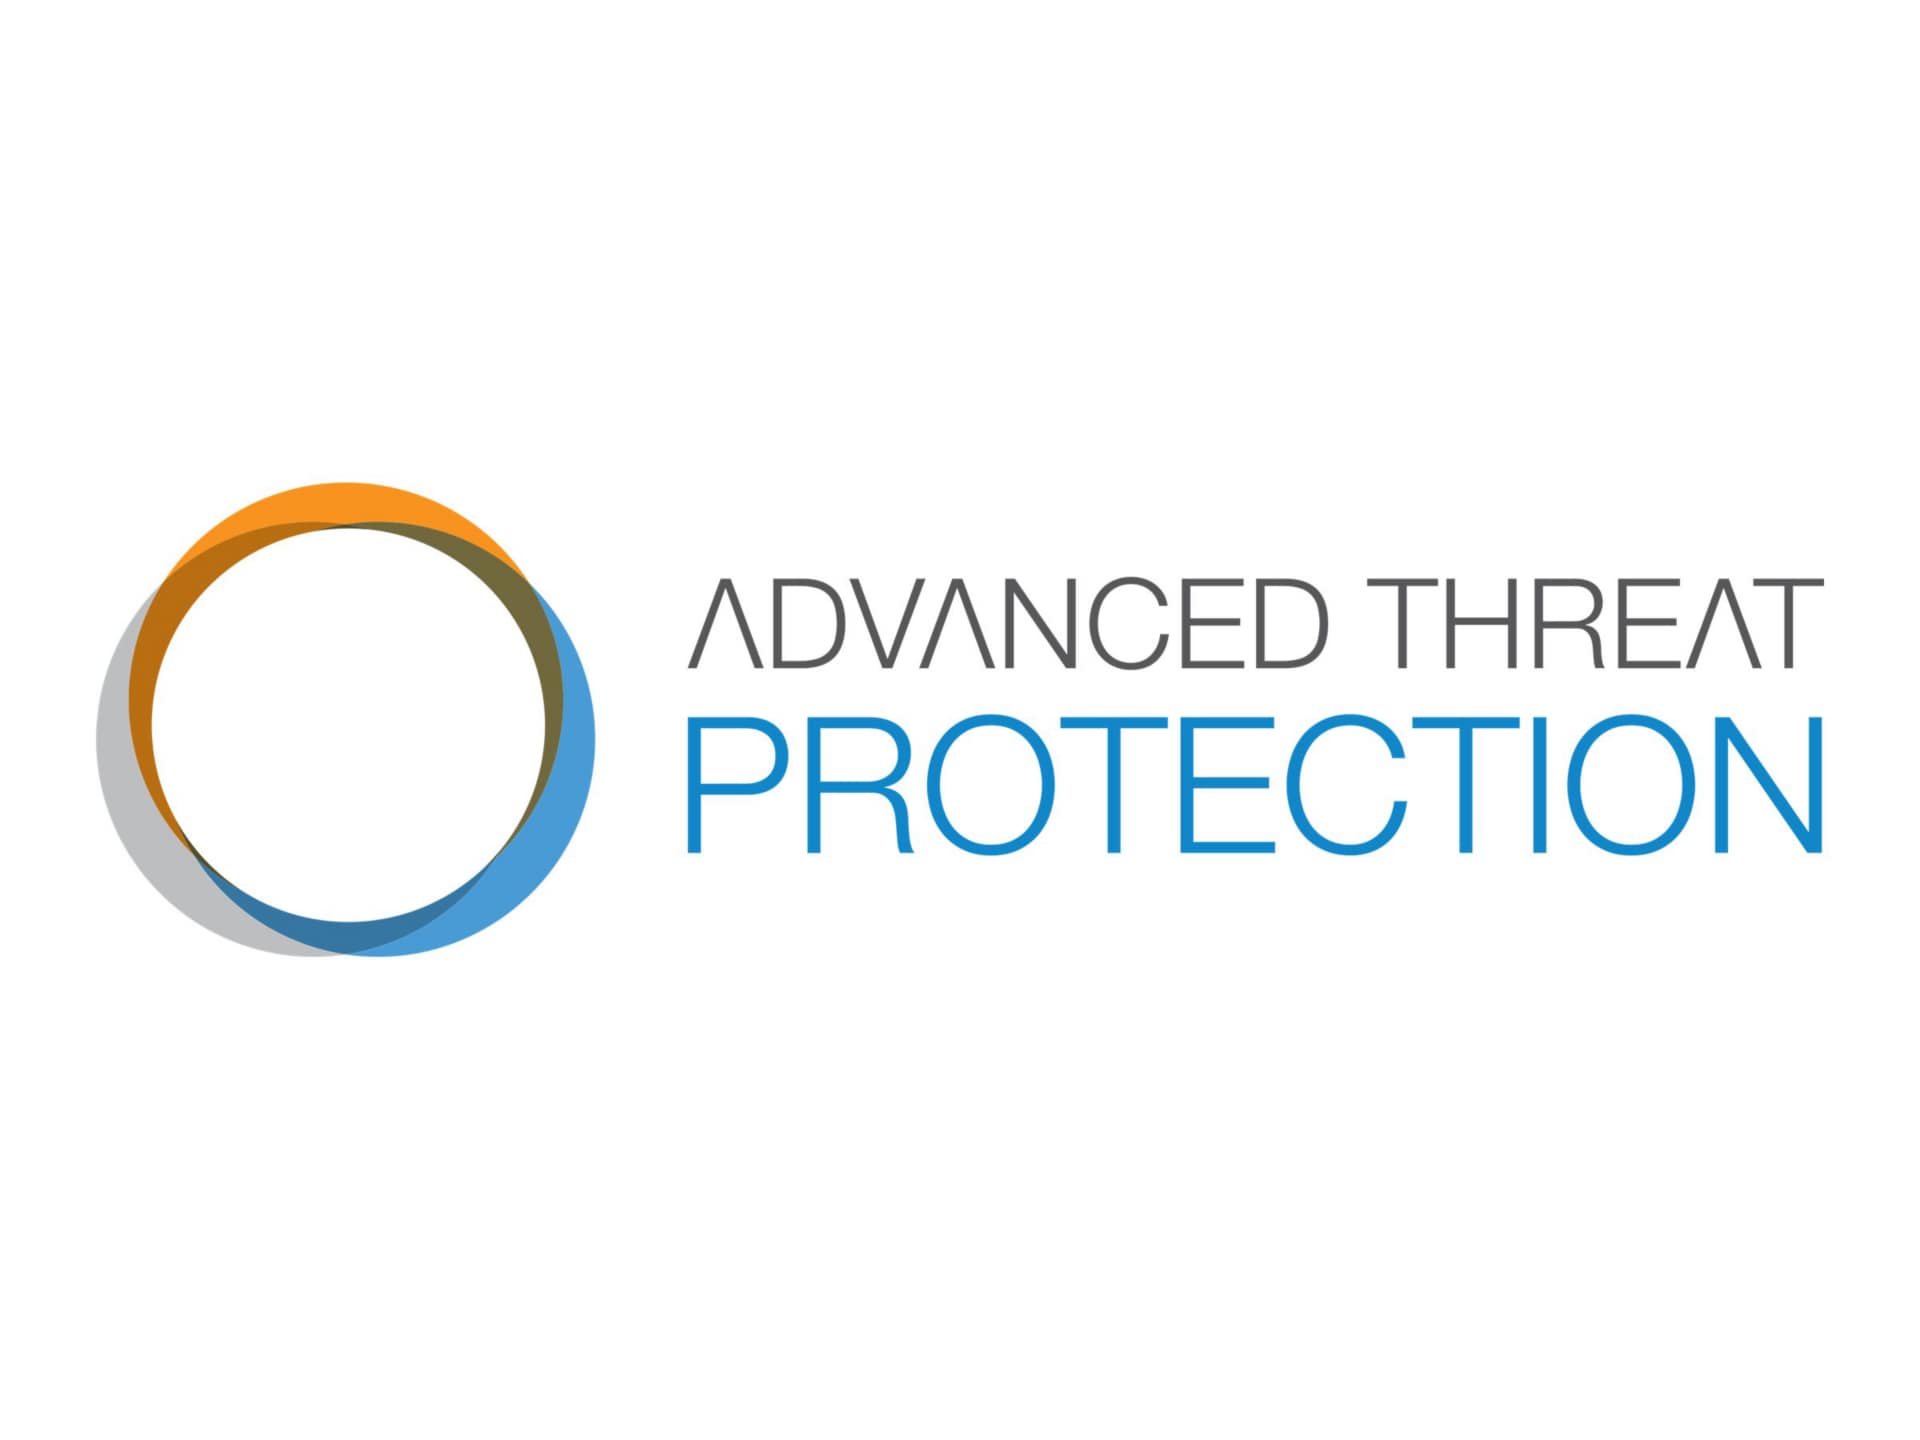 Barracuda Advanced Threat Protection - subscription license (1 month) - 1 license